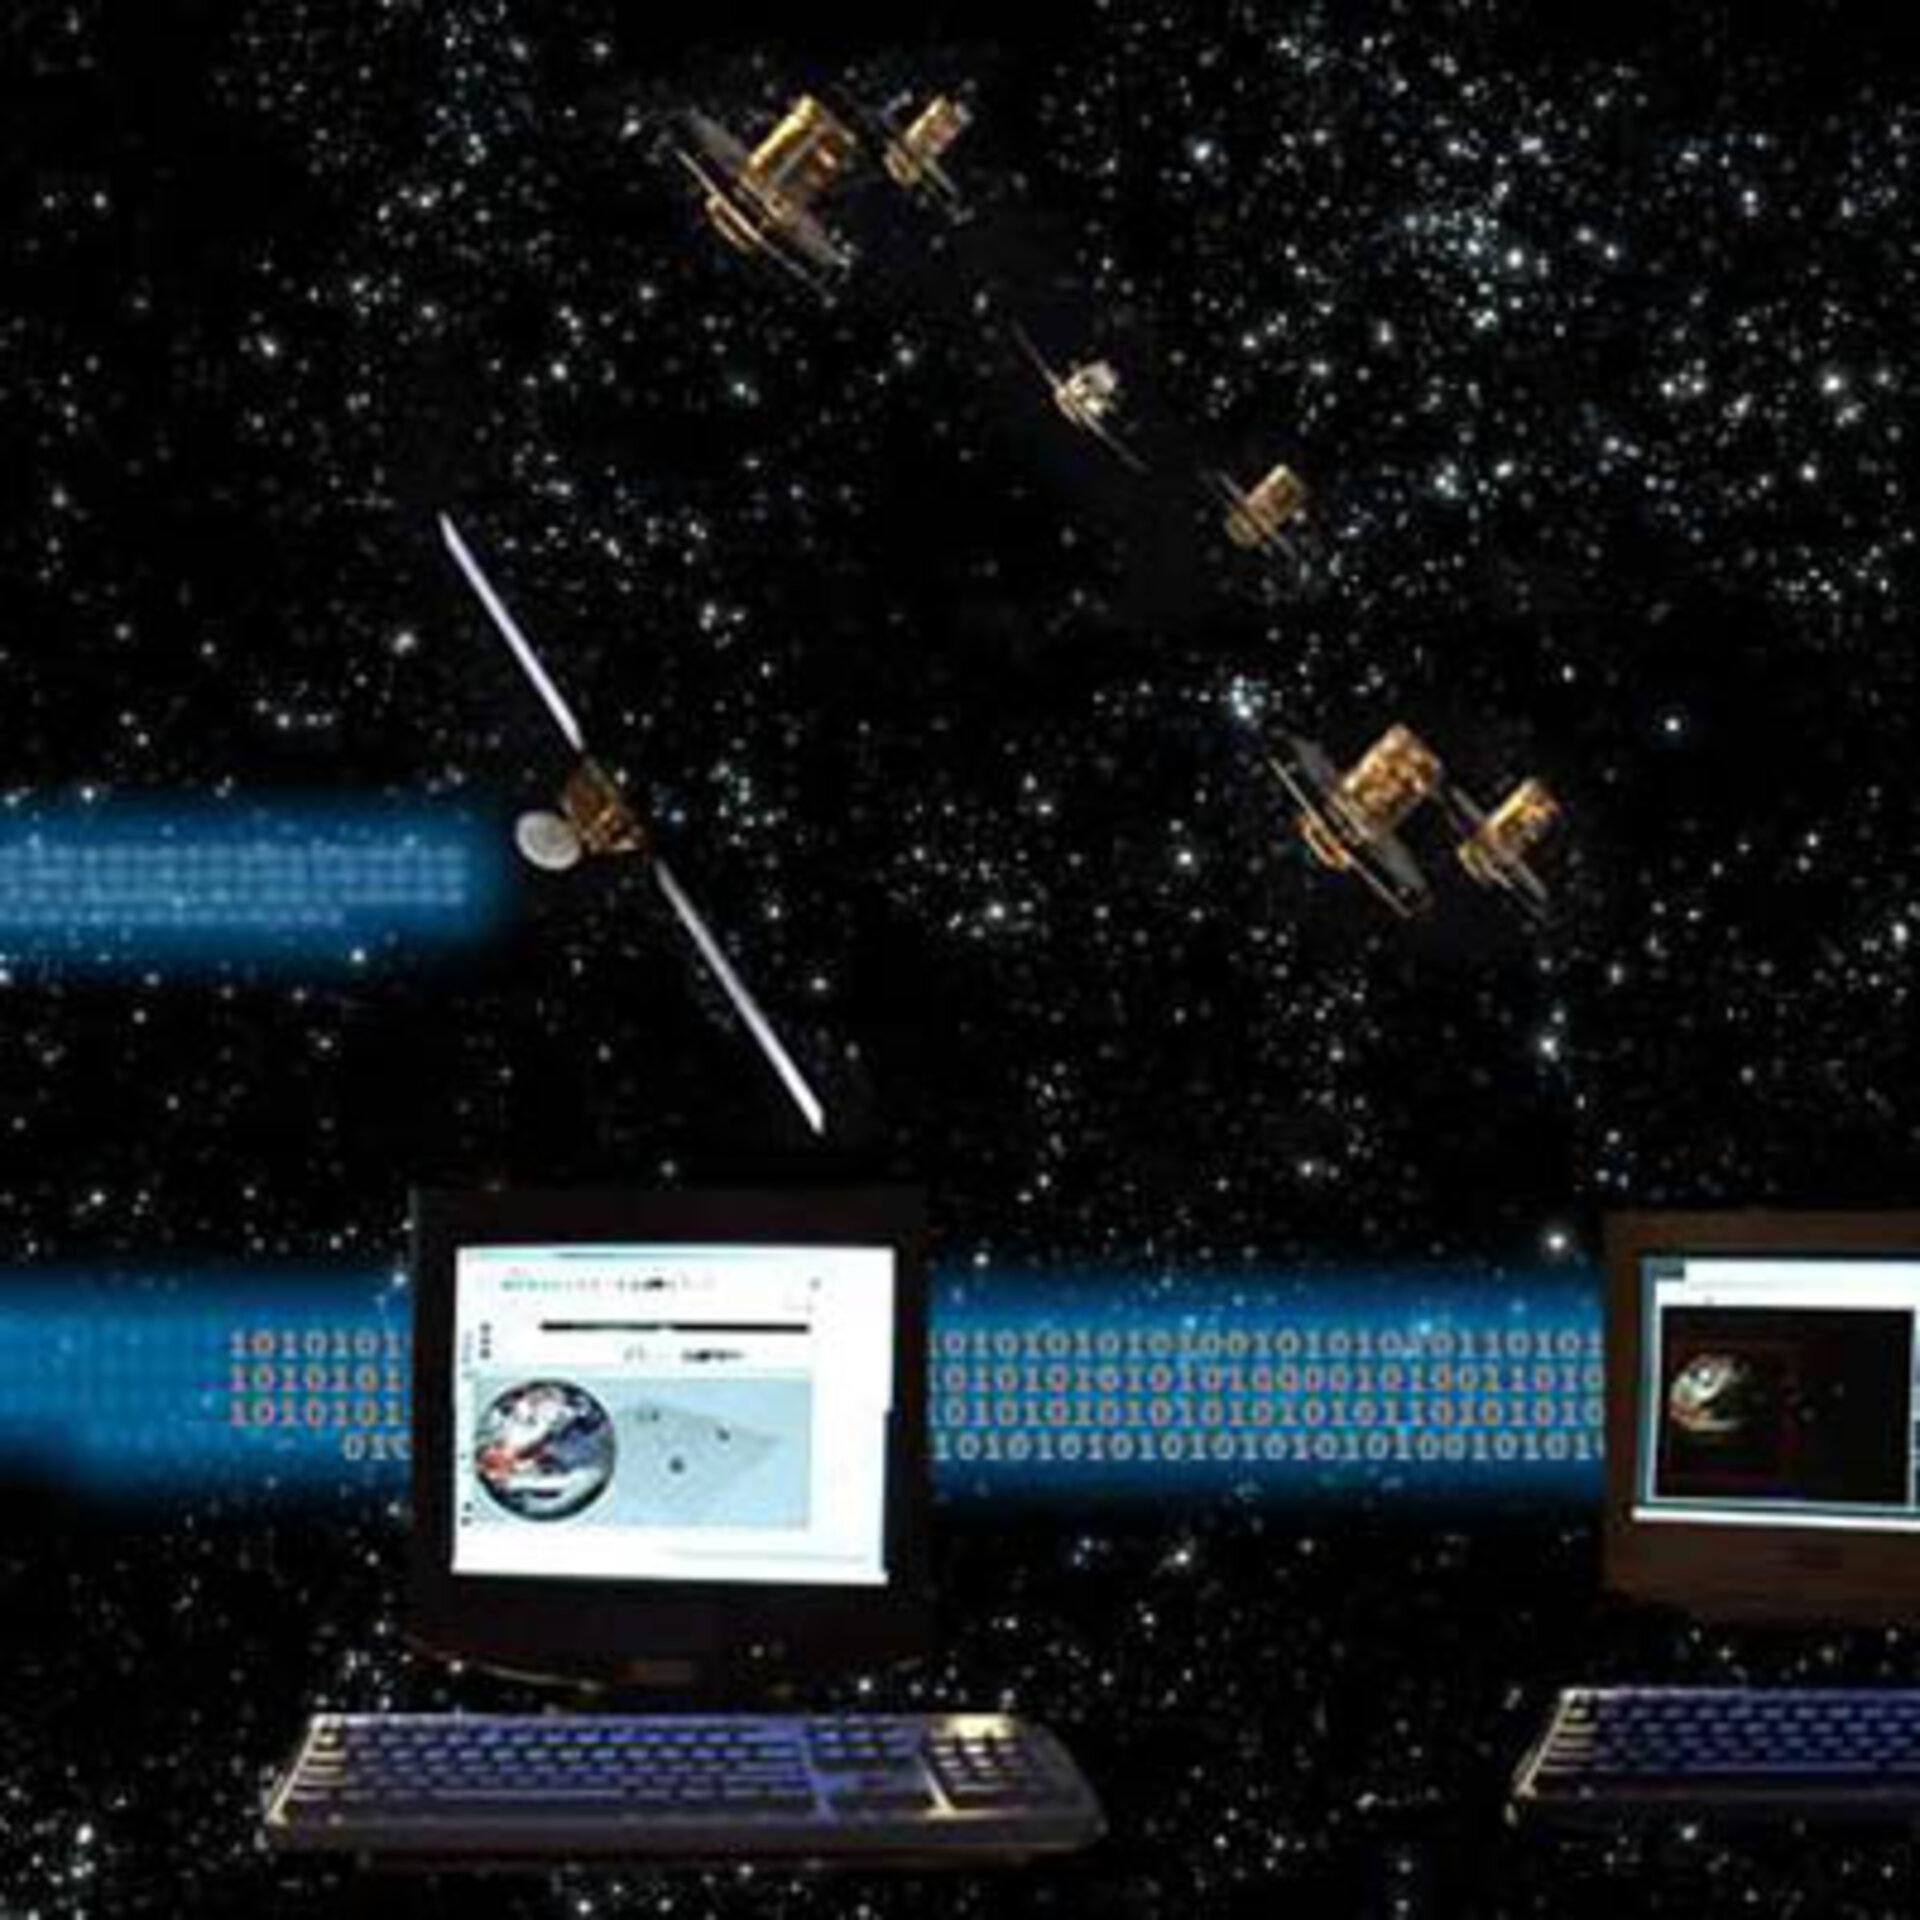 Integrated optics being developed for the Darwin mission may make Internet faster